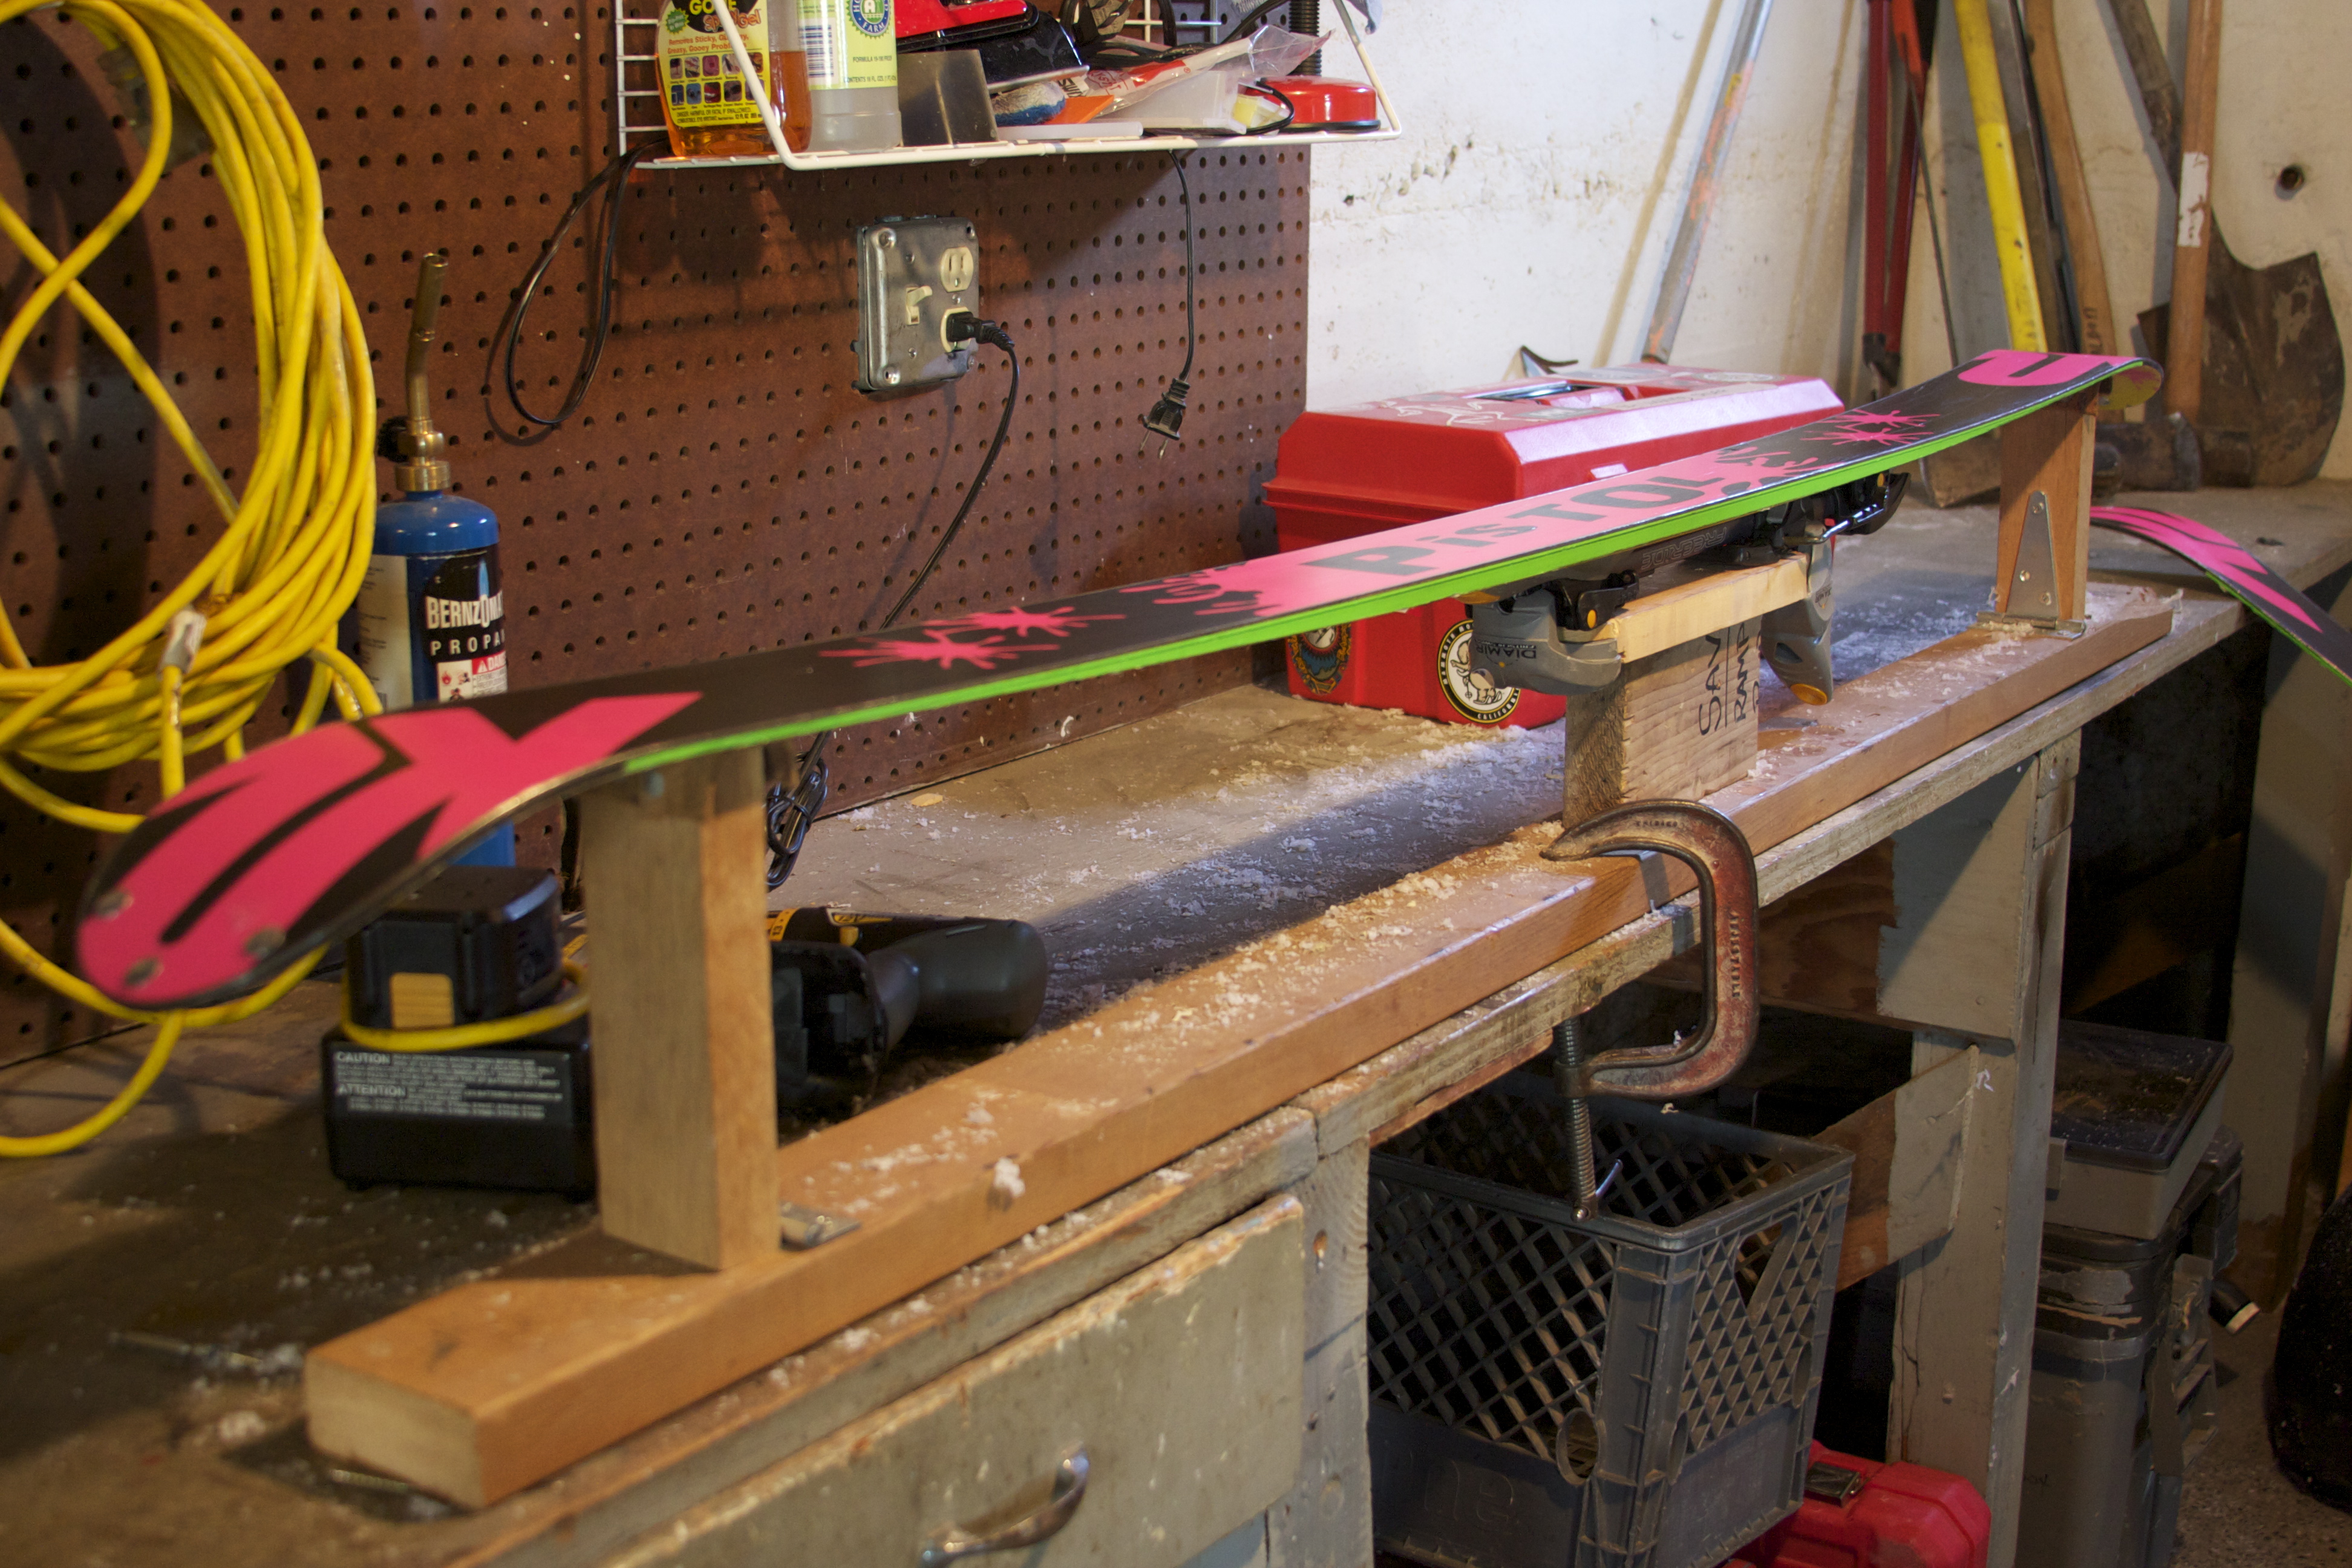 Diy Ski Tuning Bench Cascadian Rythym throughout The Most Stylish as well as Lovely how to ski tune up pertaining to Your own home